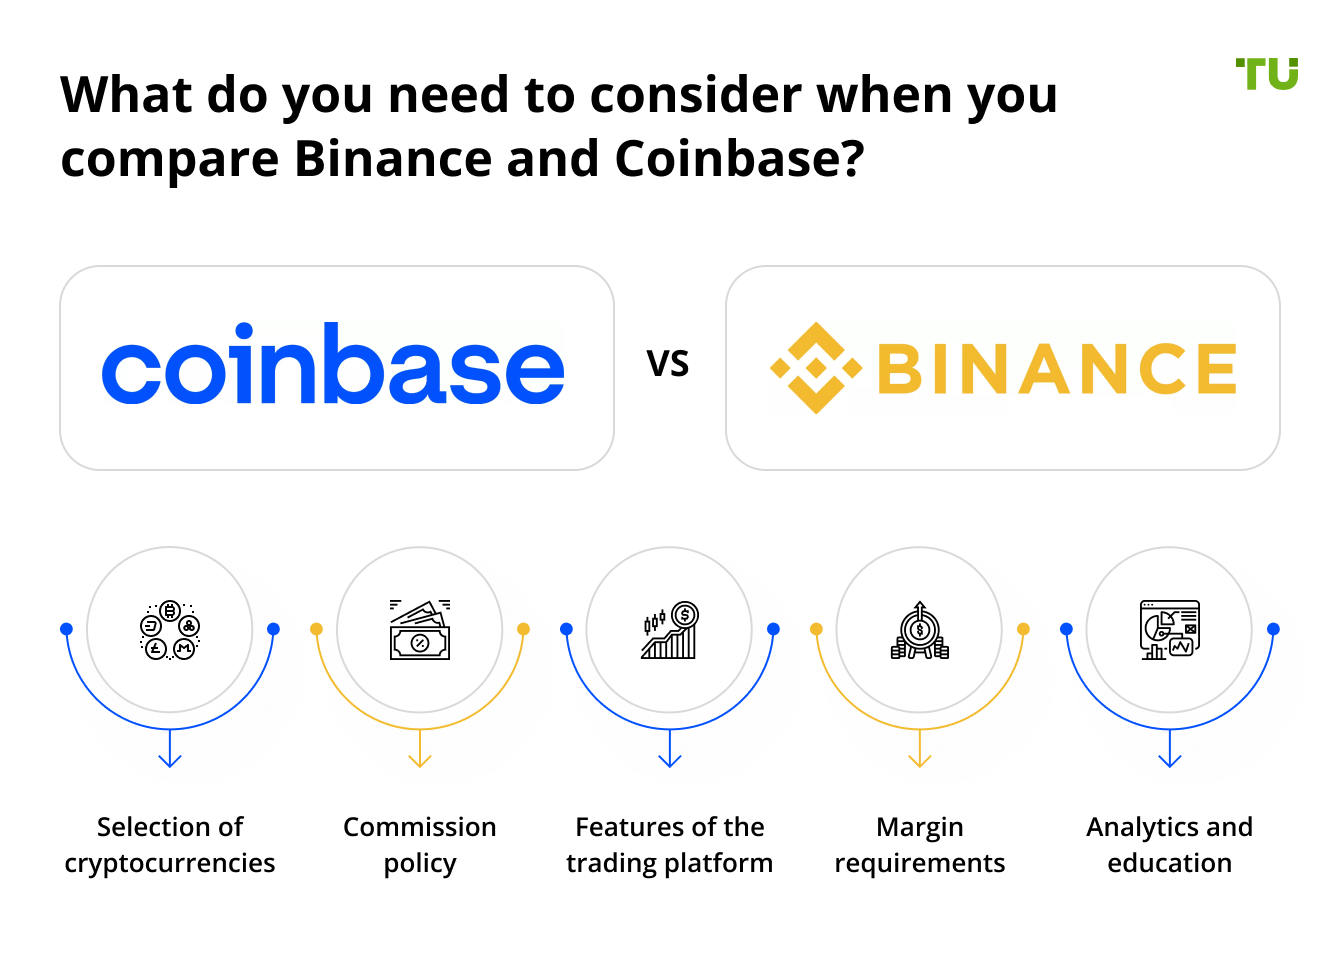 What do you need to consider when you compare Binance and Coinbase?